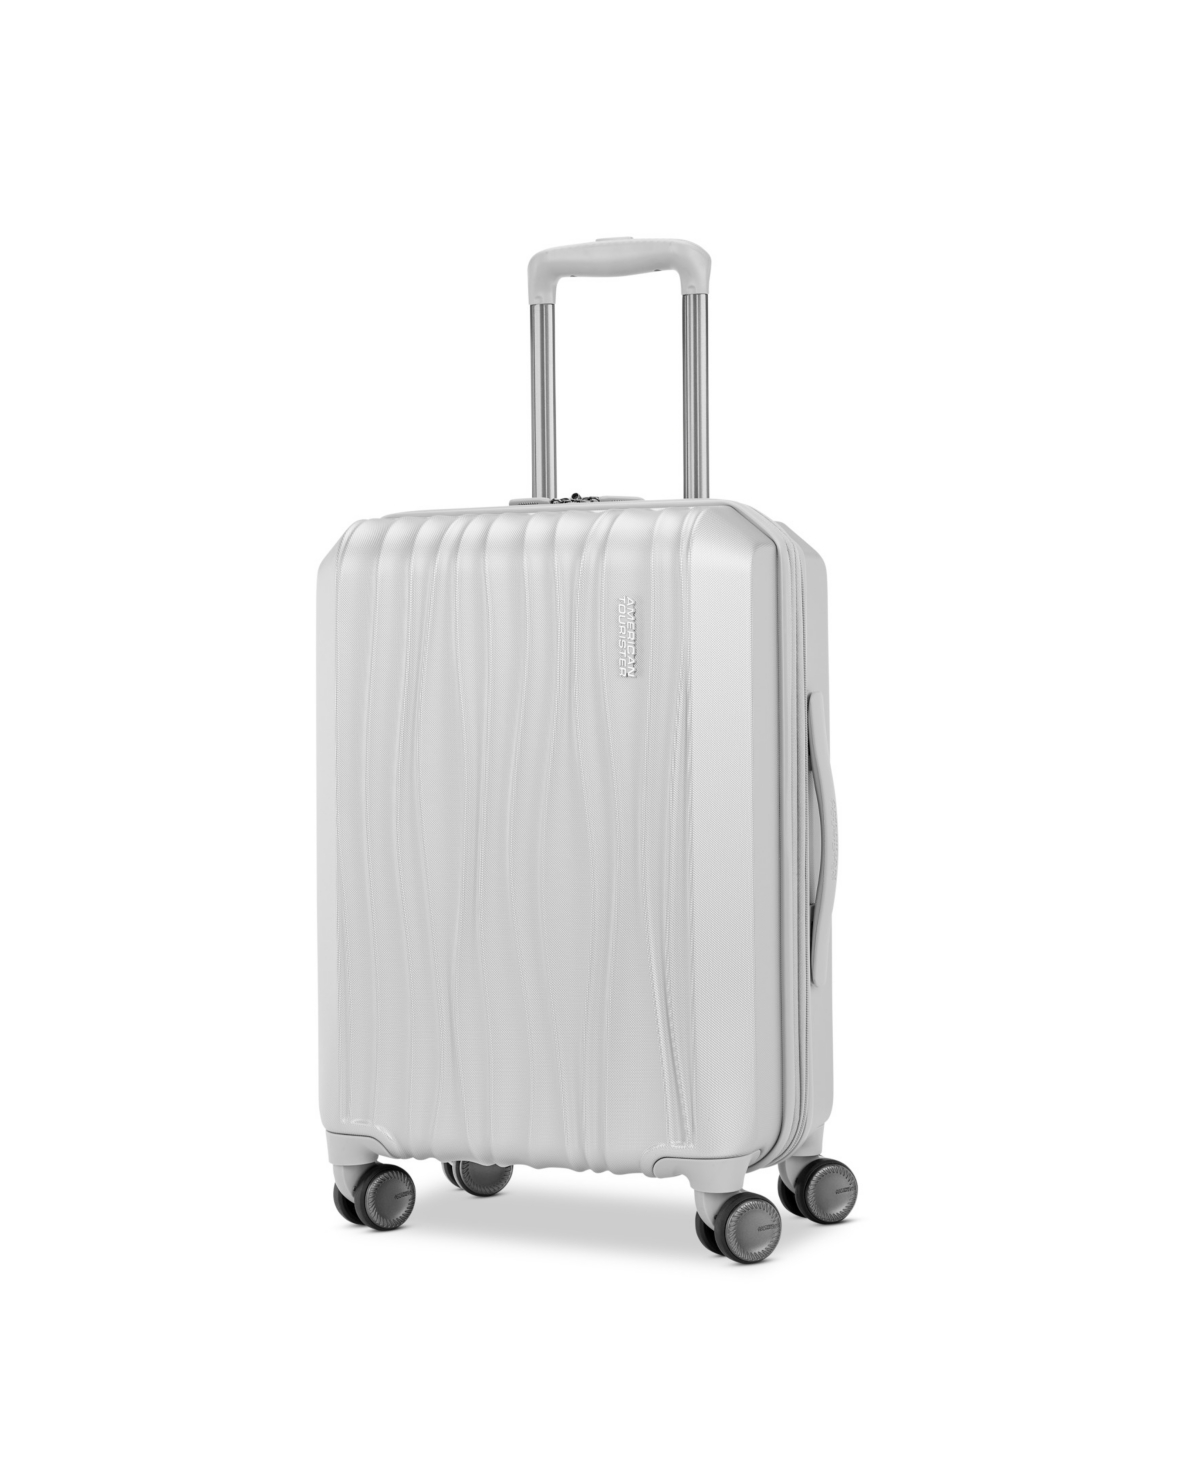 American Tourister Tribute Encore Hardside Carry On 20" Spinner Luggage In Silver